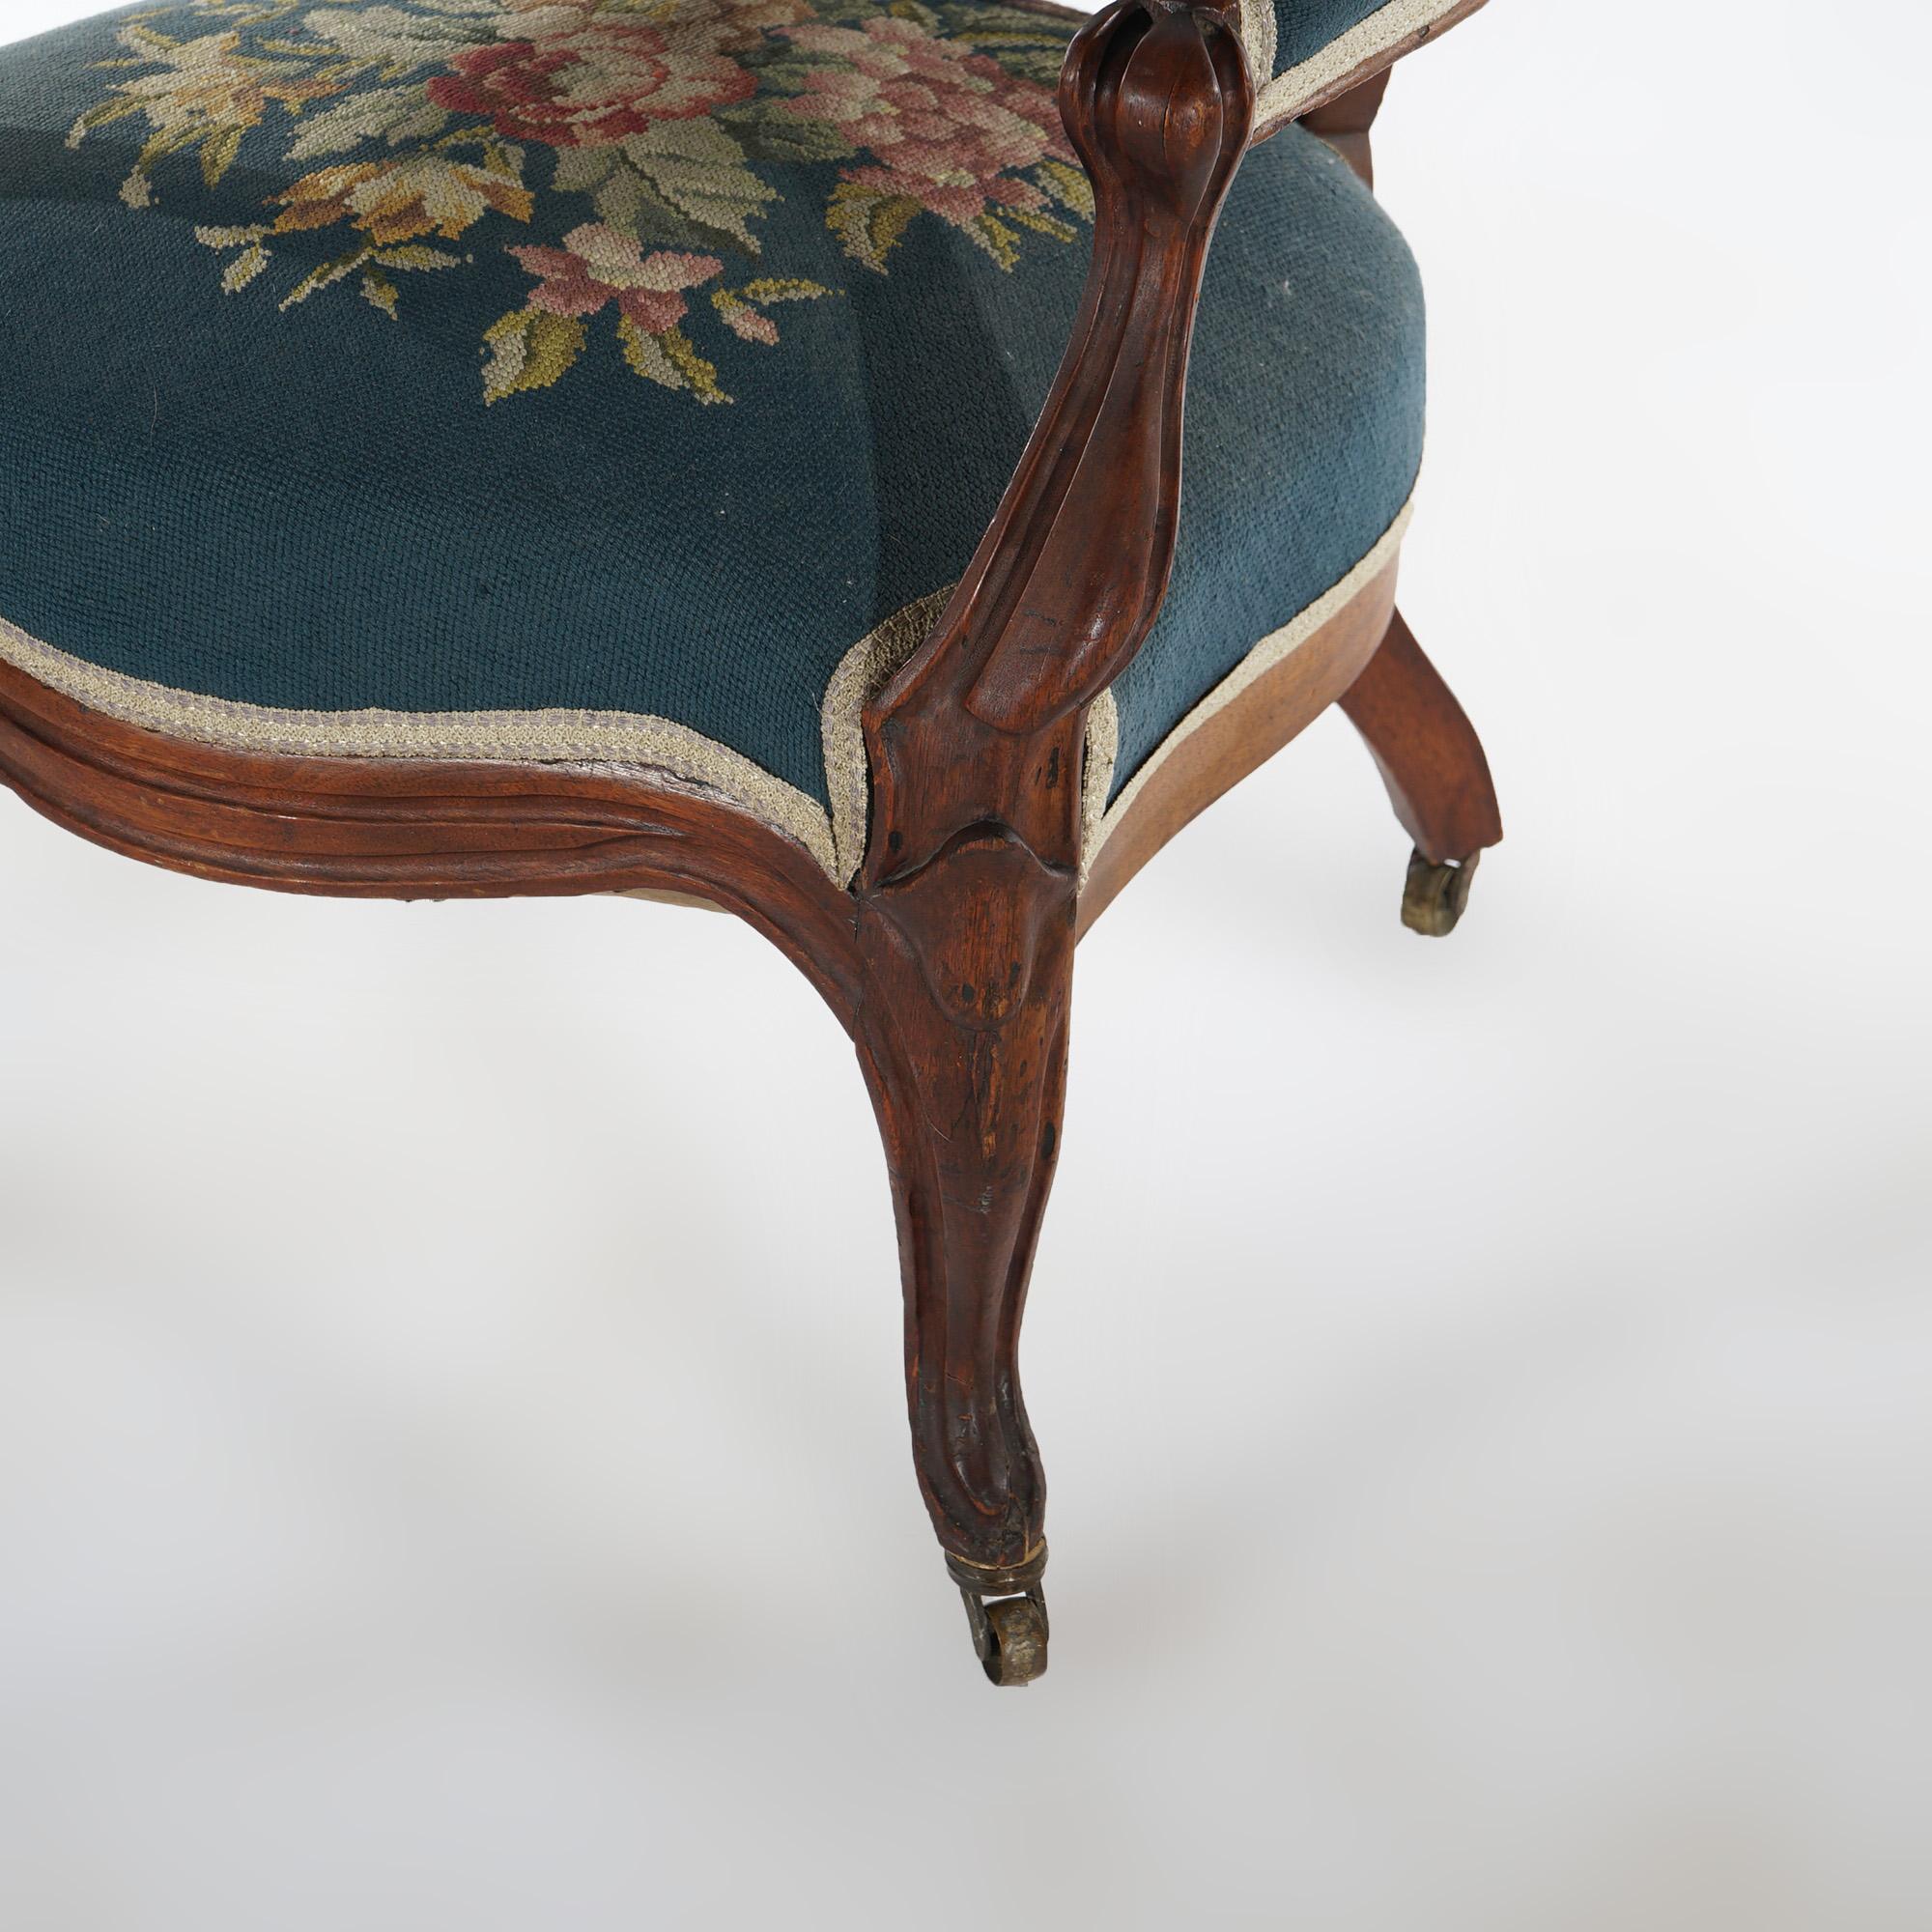 Carved Antique Victorian Walnut & Needlepoint Ladies Parlor Arm Chair, c1890